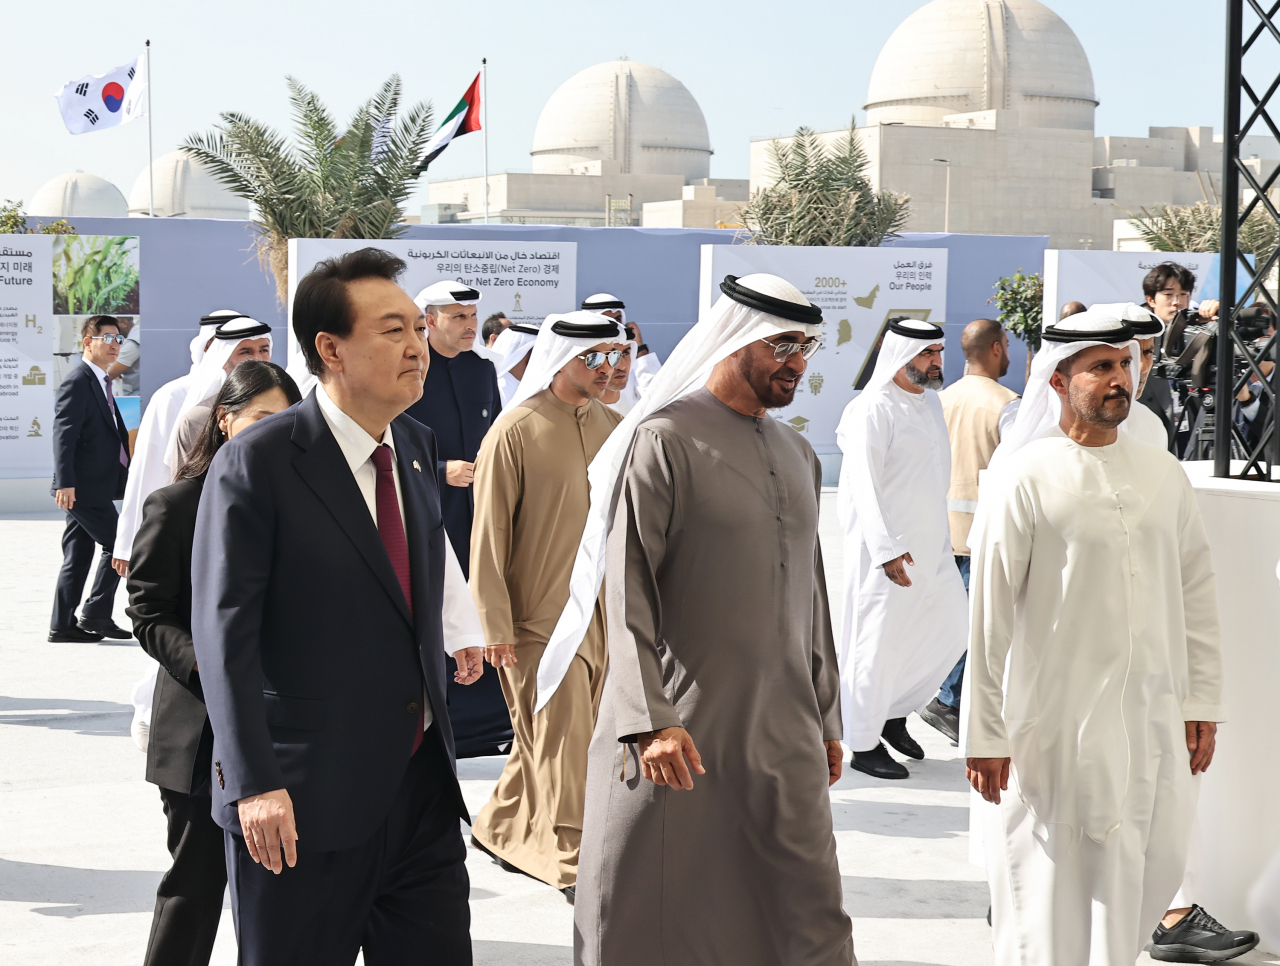 President Yoon Suk Yeol, who is on a state visit to the United Arab Emirates, heads to the event site with Emirati leader Sheikh Mohammed bin Zayed Al Nahyan and other attendees at the Barakah nuclear power plant operation ceremony for unit 3 on Tuesday. (Yonhap)